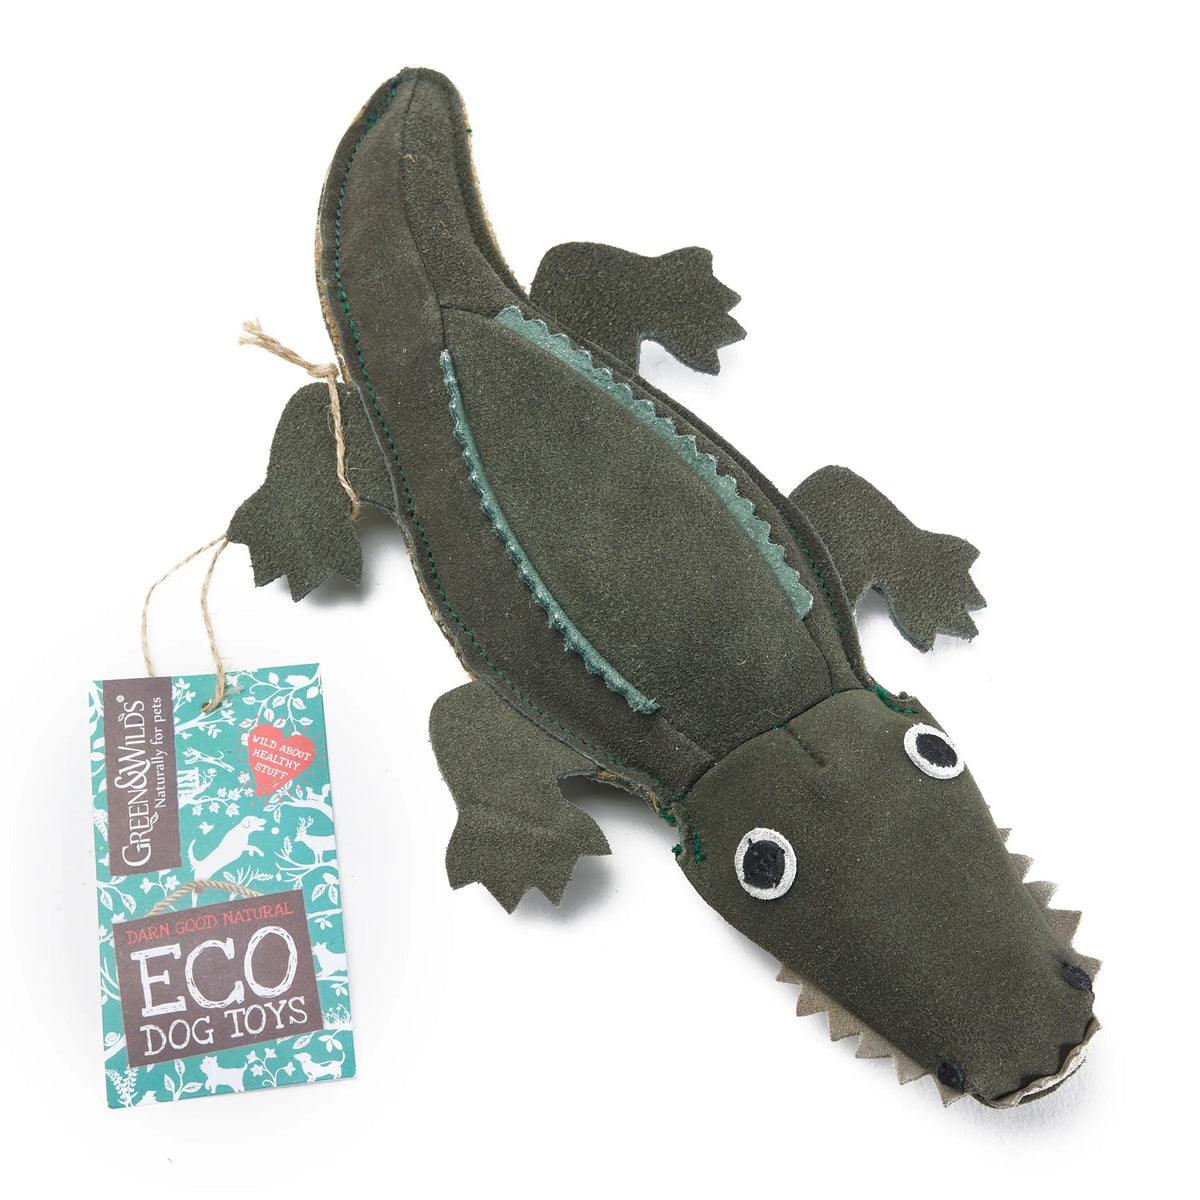 Colin the Crocodile Eco Dog Toy - The Mewstone Candle Co